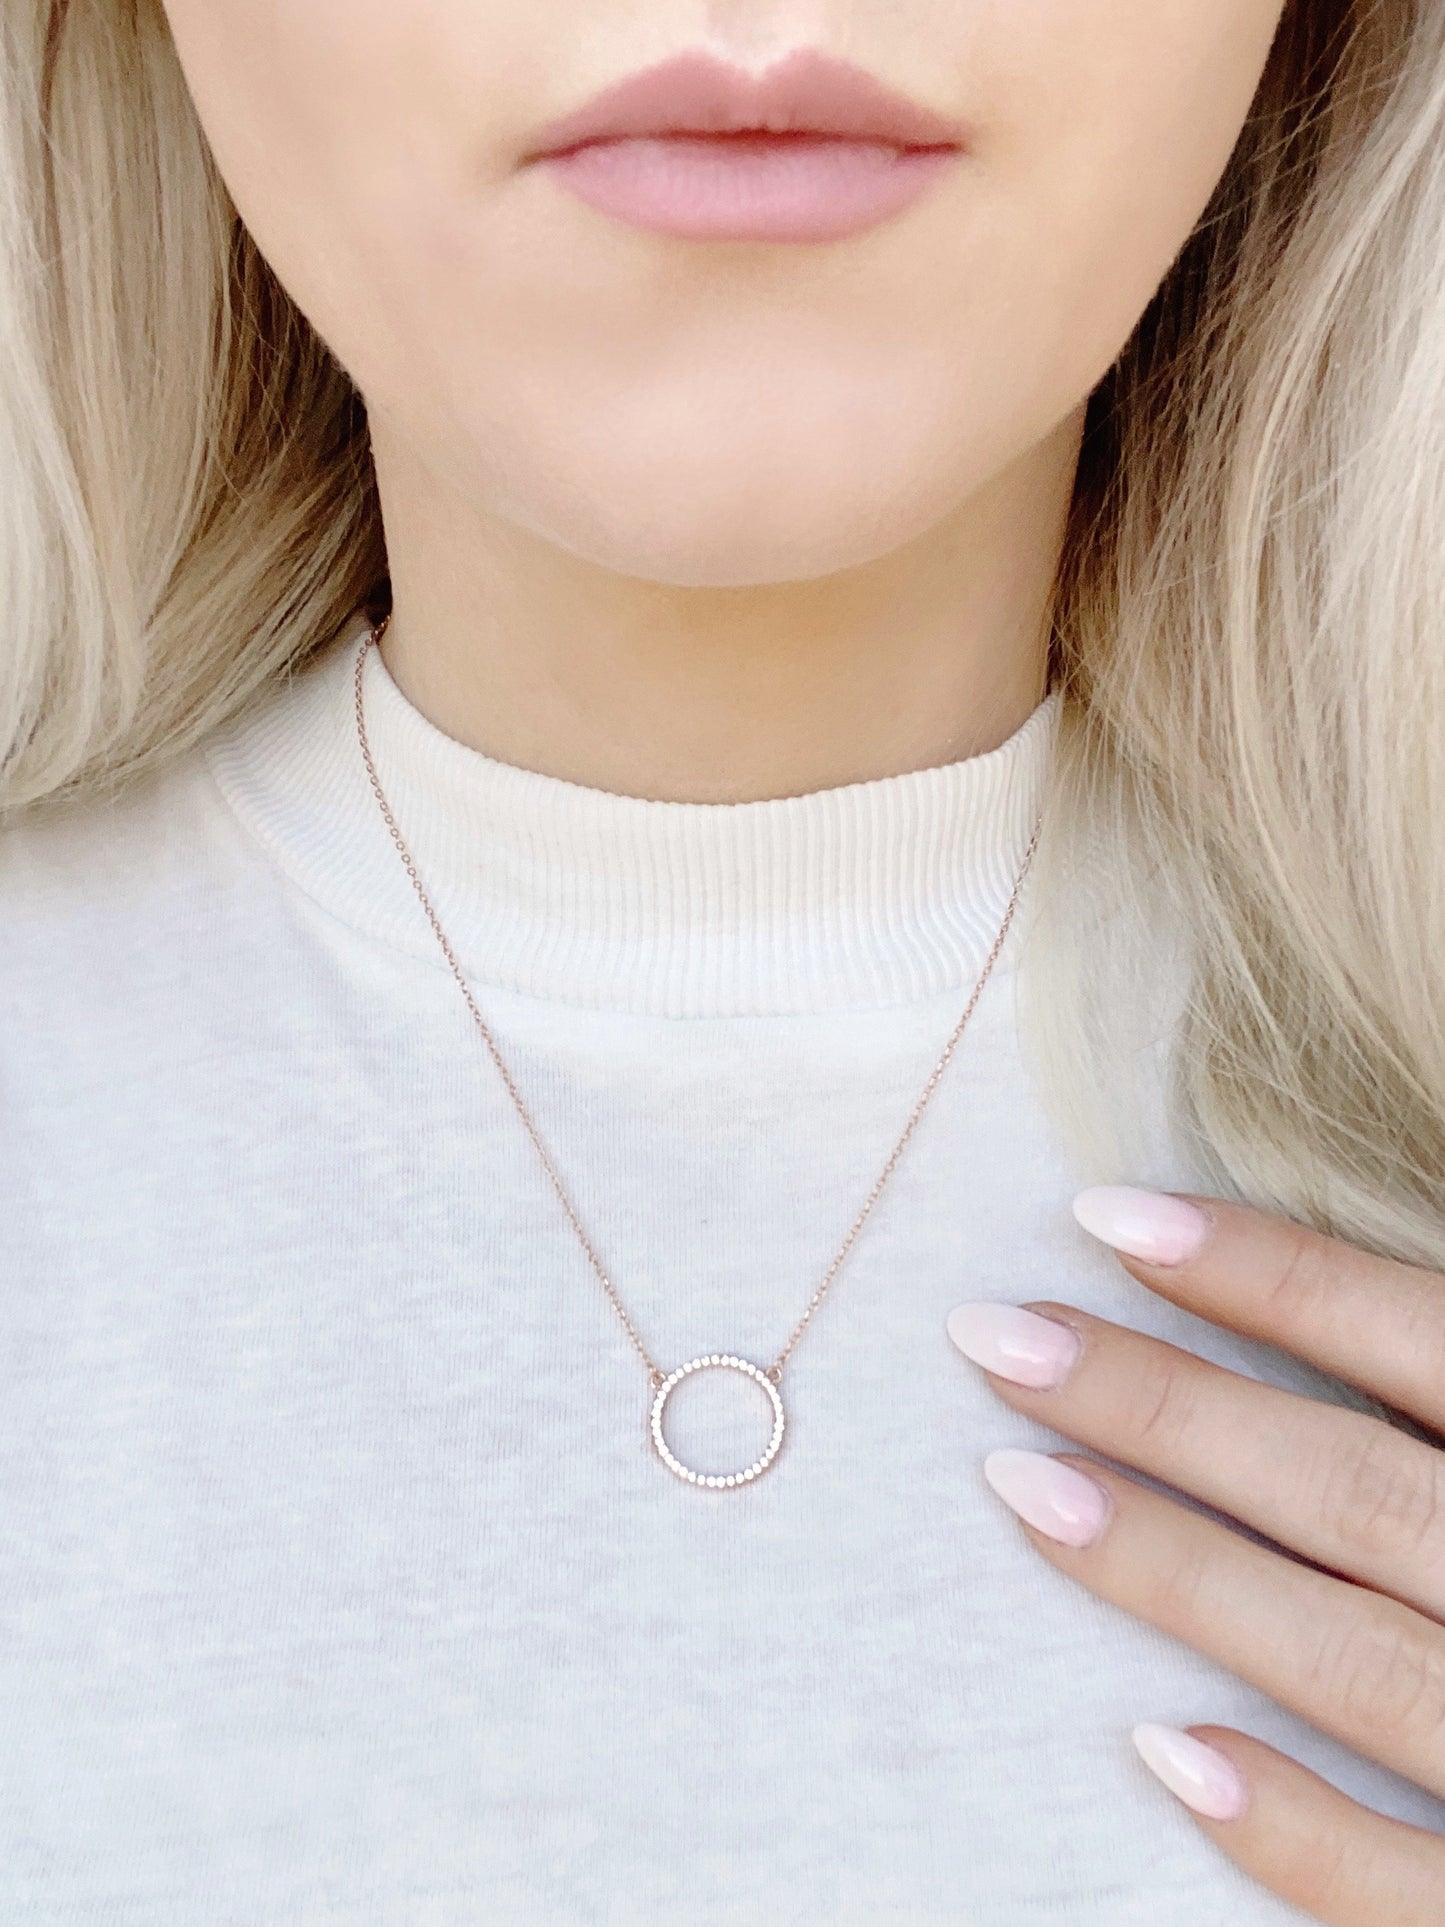 Now Act SURPRISED! Circle Pendant Necklace